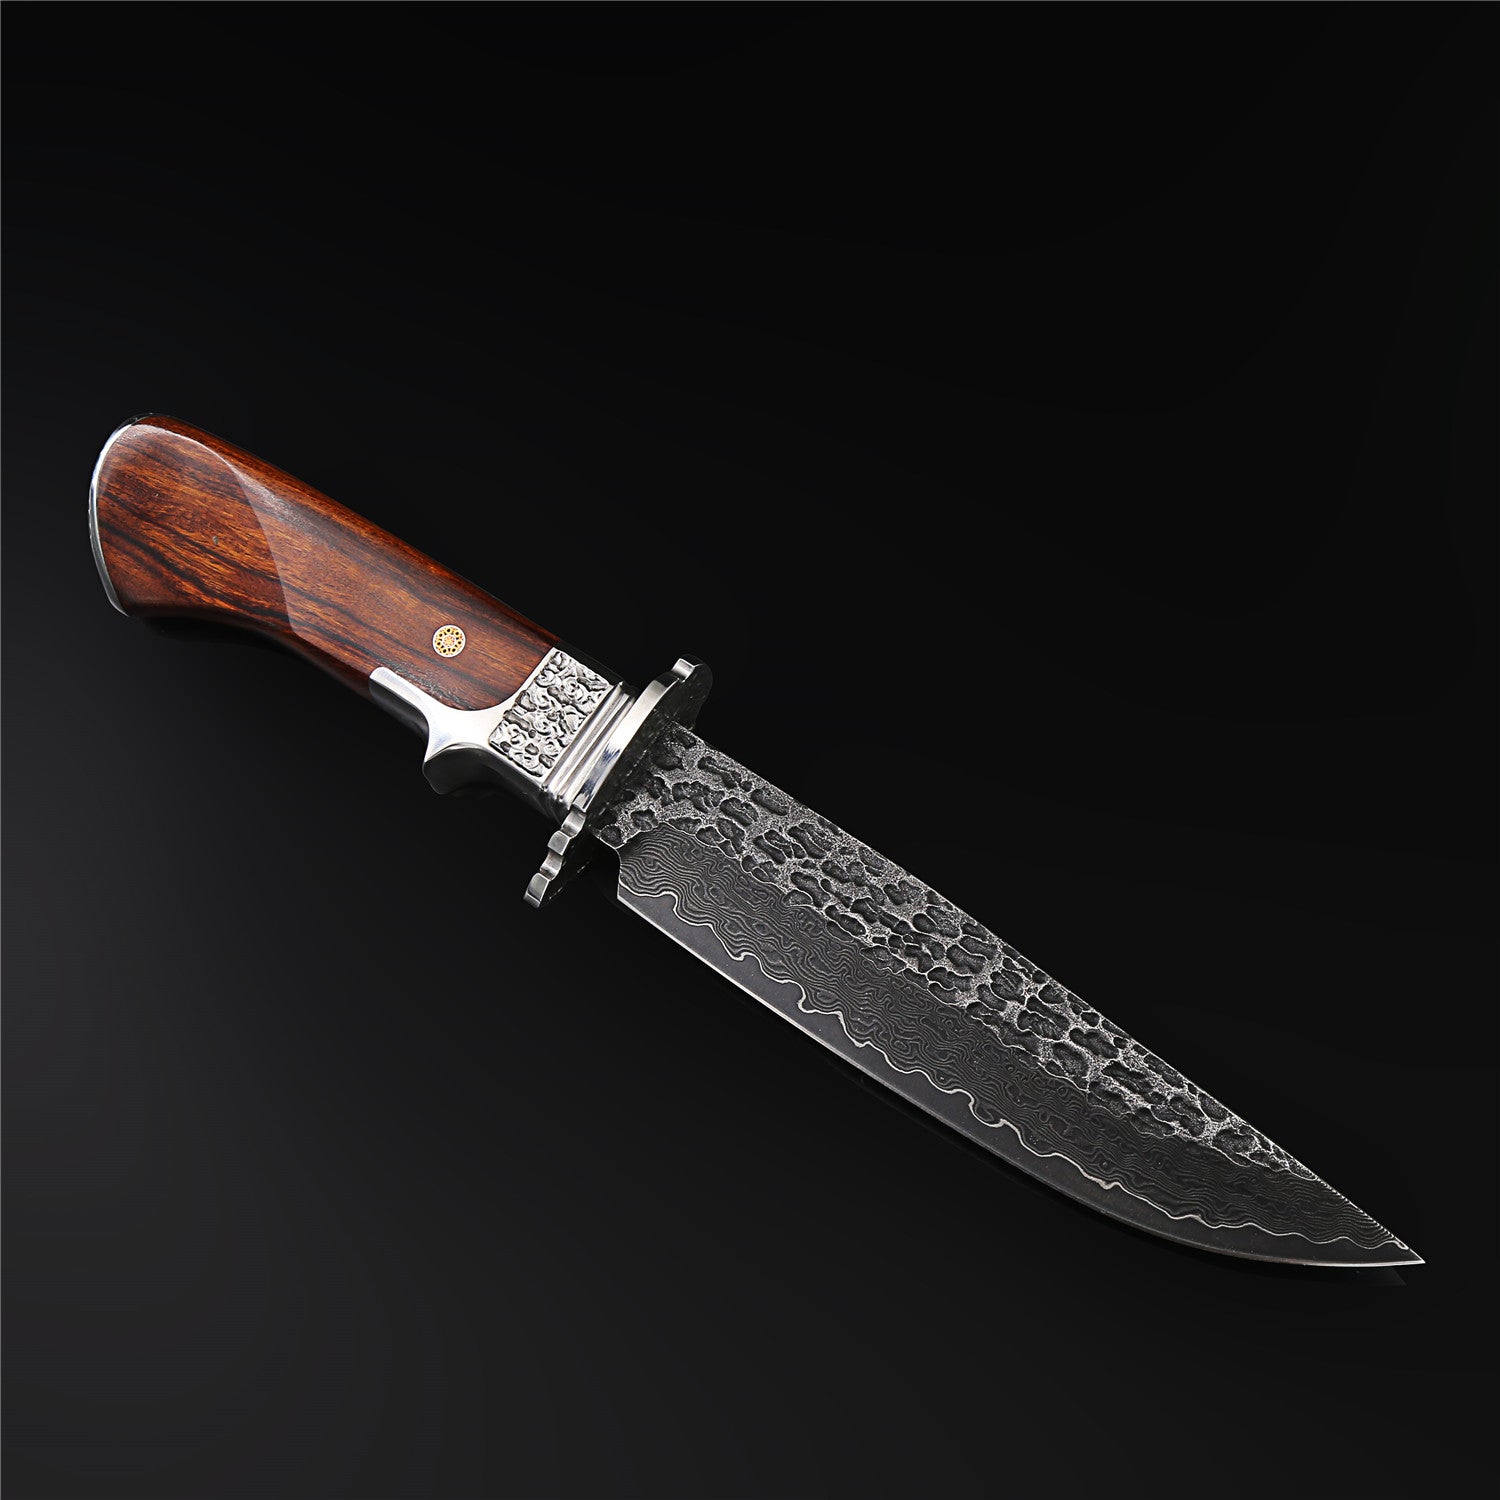 The Craftsman Damascus Steel Fixed Blade